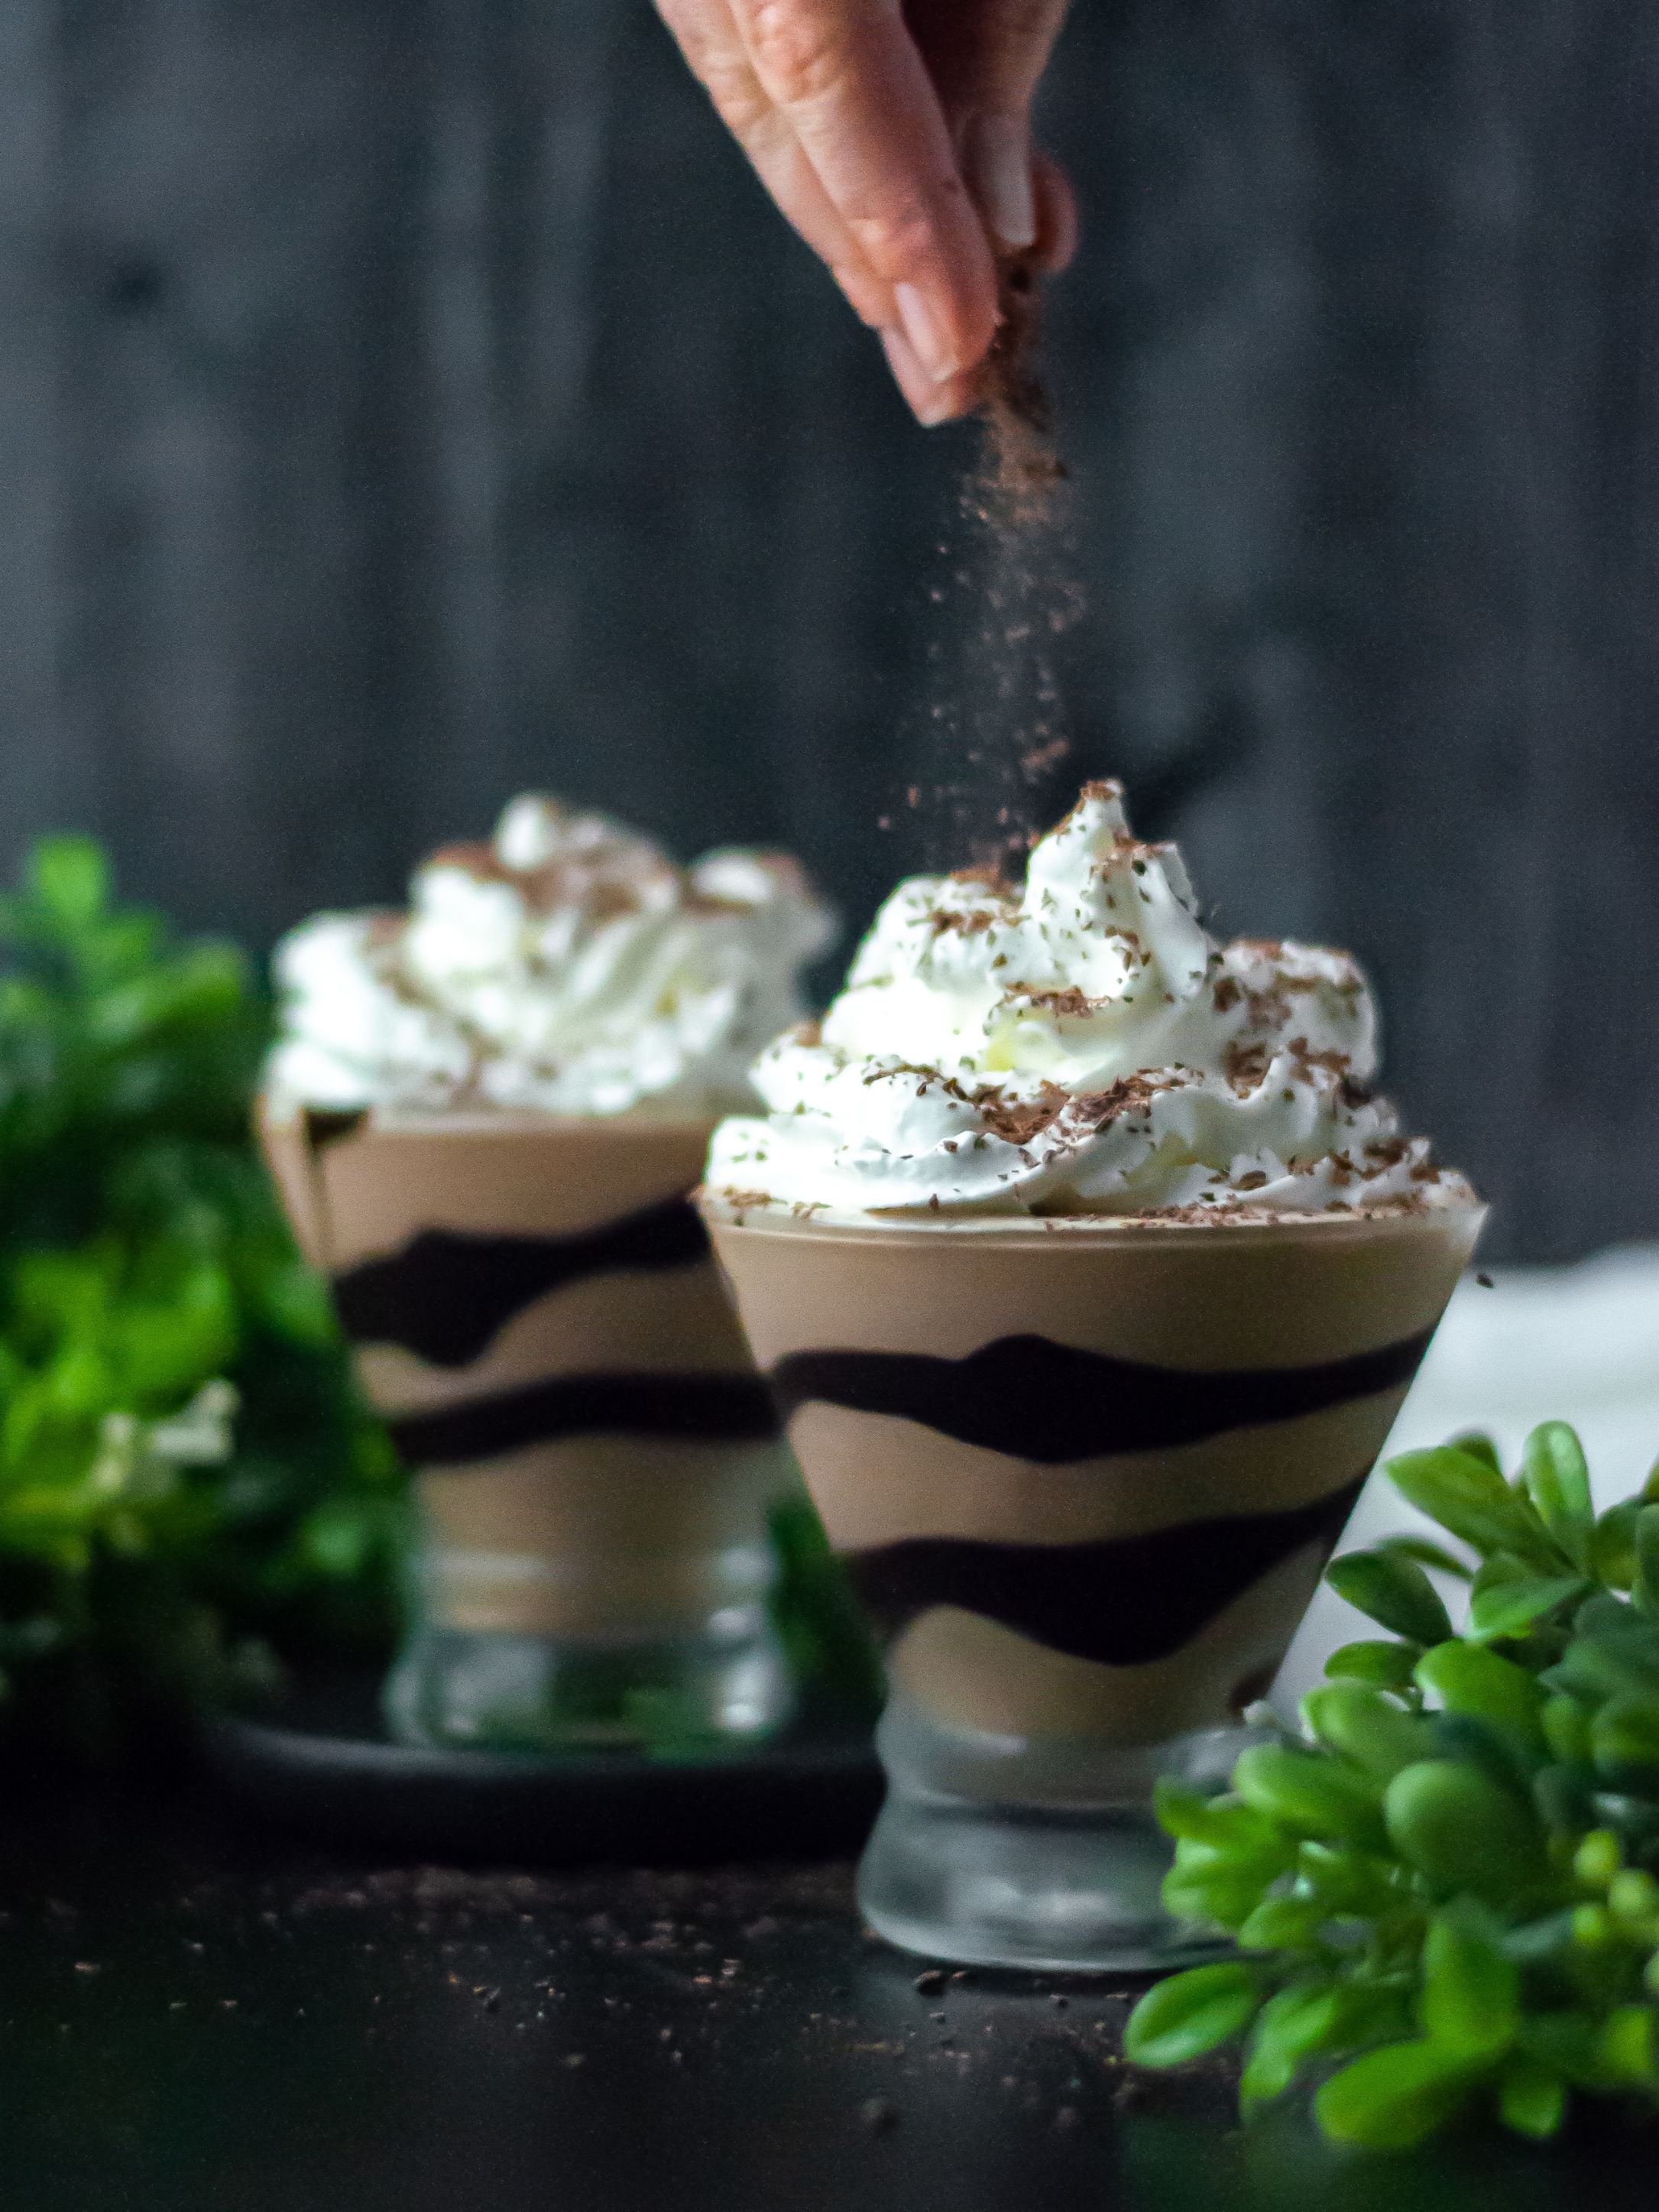 Two glasses of frozen mudslides, topped with whipped cream, and in the process of being sprinkled with chocolate shavings.